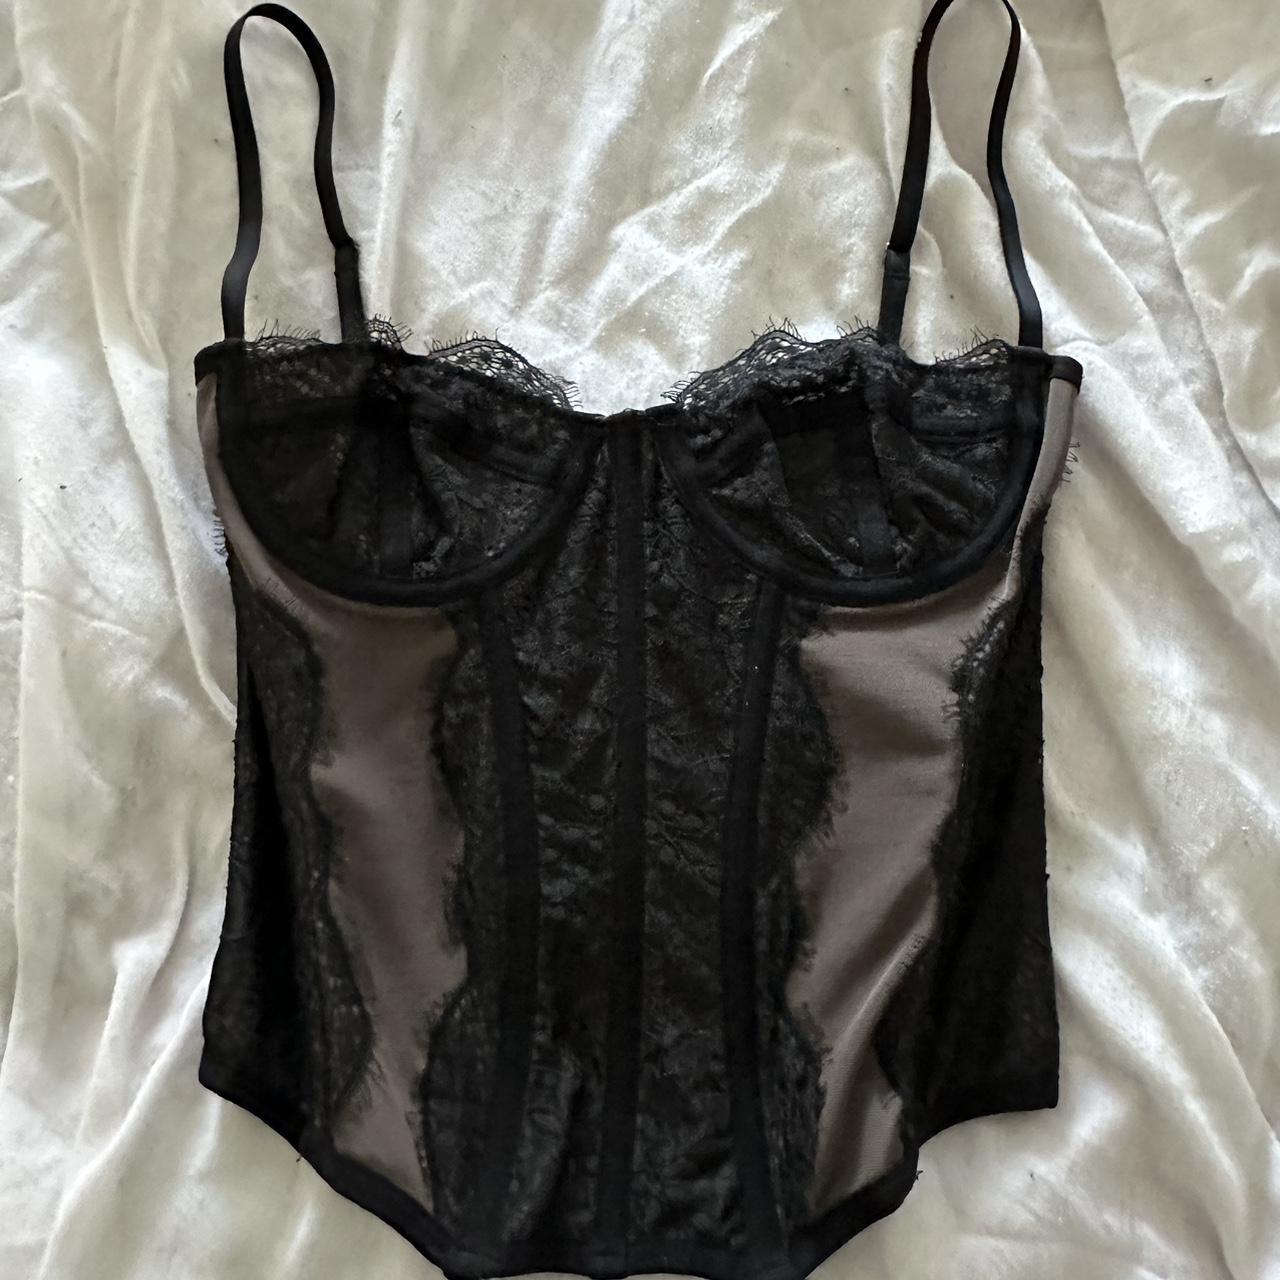 URBAN OUTFITTERS OUT FROM UNDER MODERN LOVE CORSET - Depop